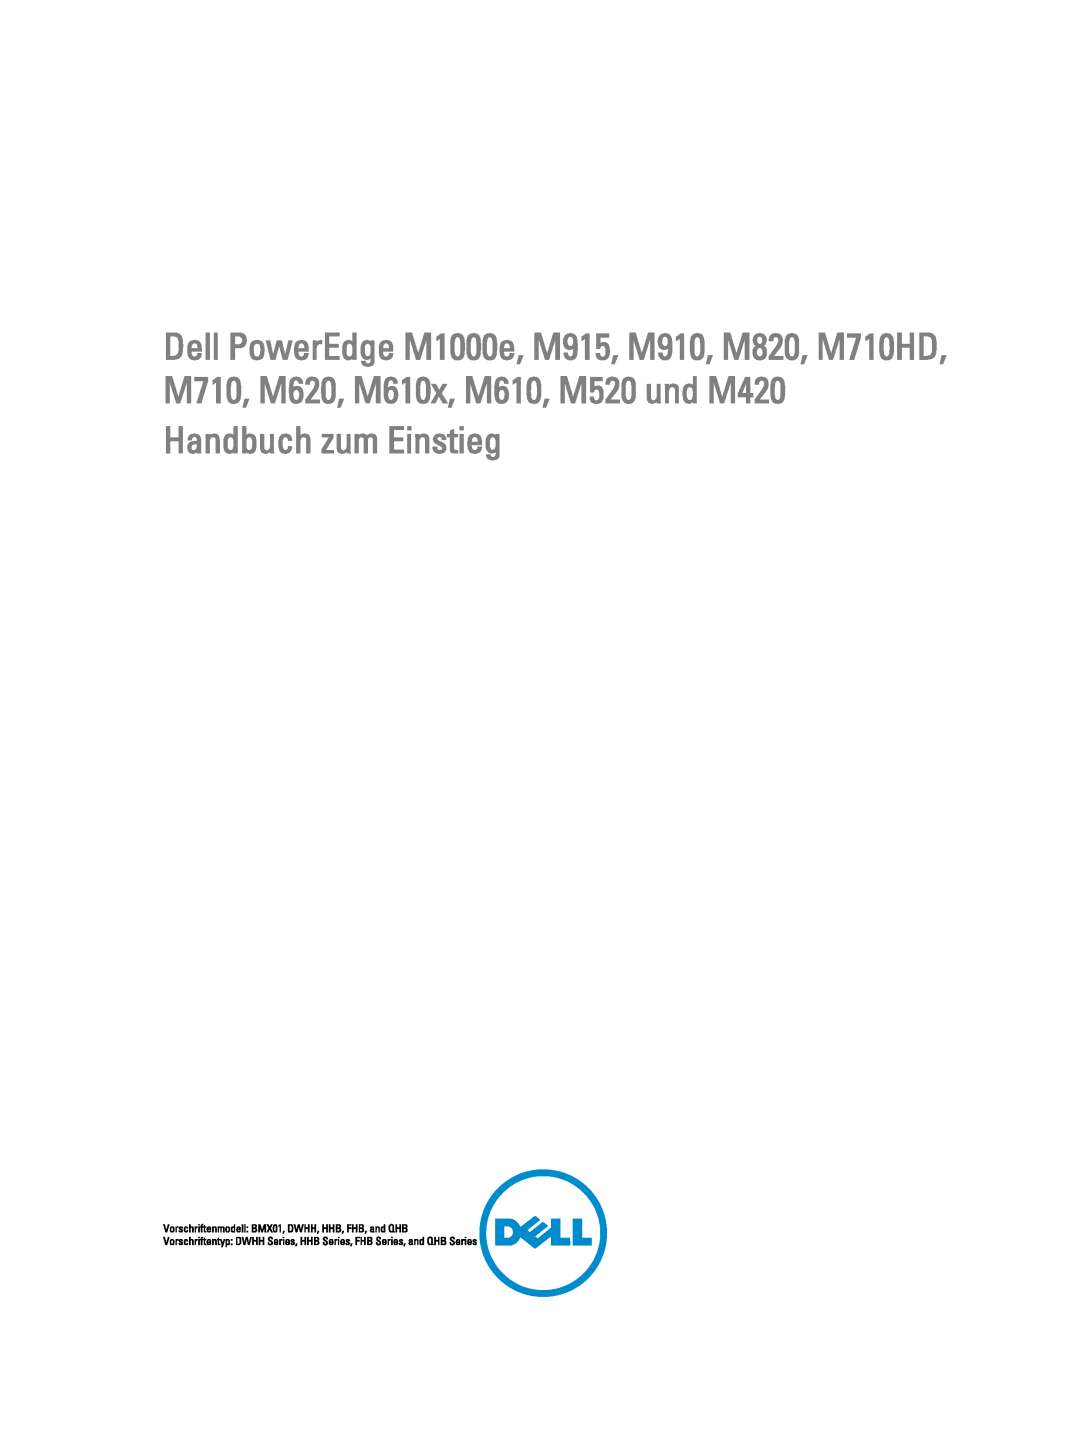 Dell M710 manual Introduction, Quick Reference Guide, Identifying the correct DIMM slots in 610 and 710 Series servers 